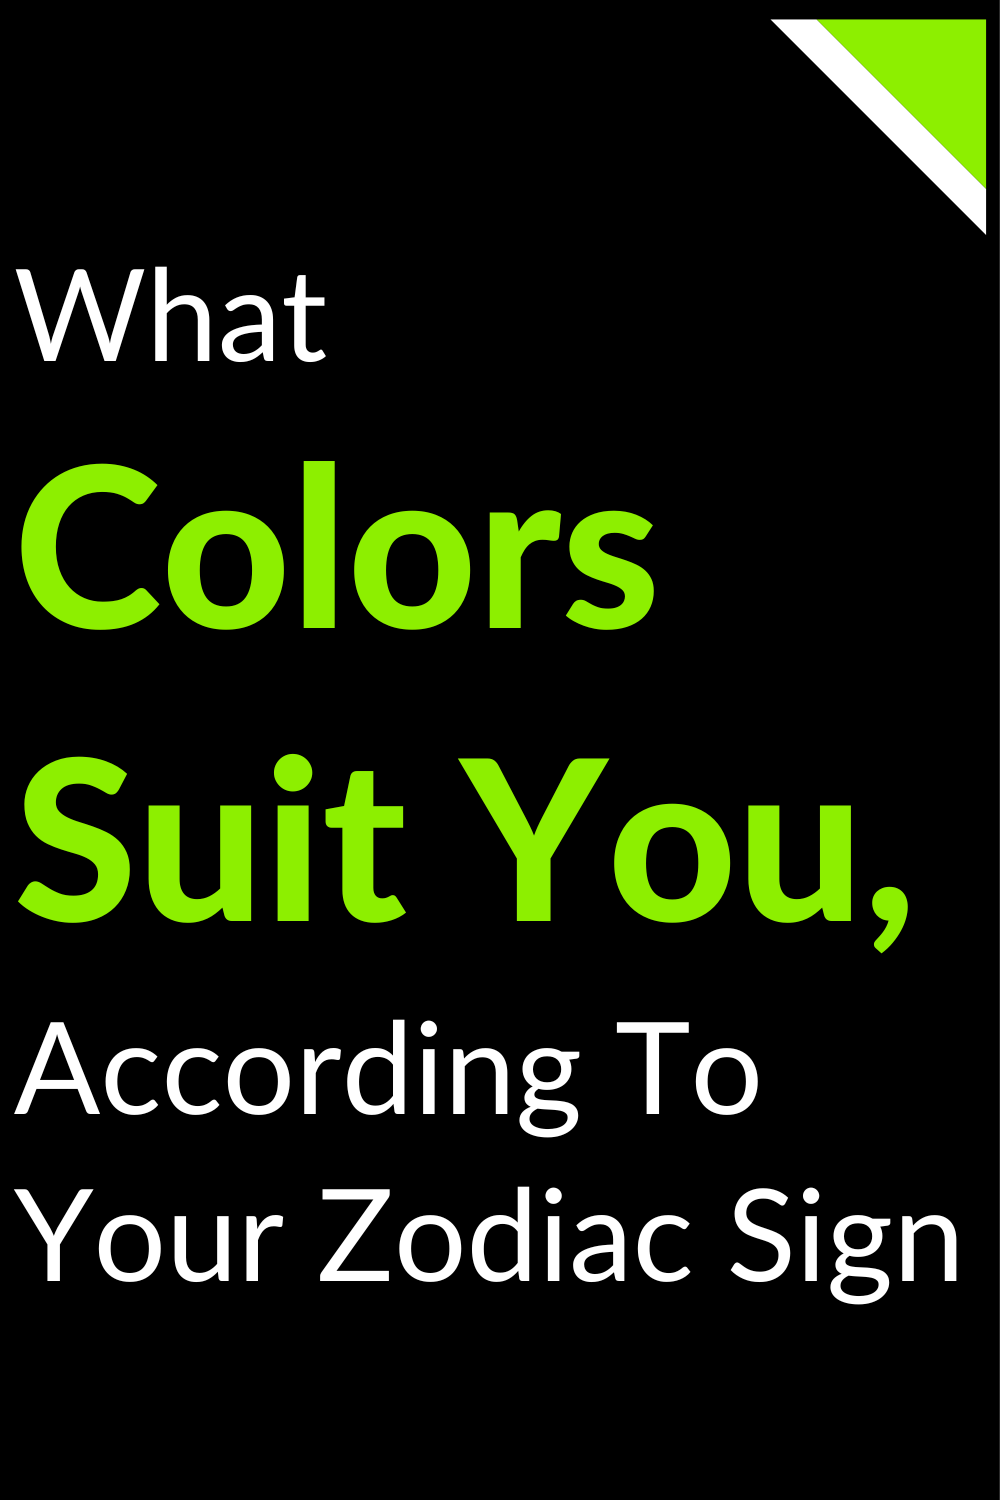 What Colors Suit You, According To Your Zodiac Sign